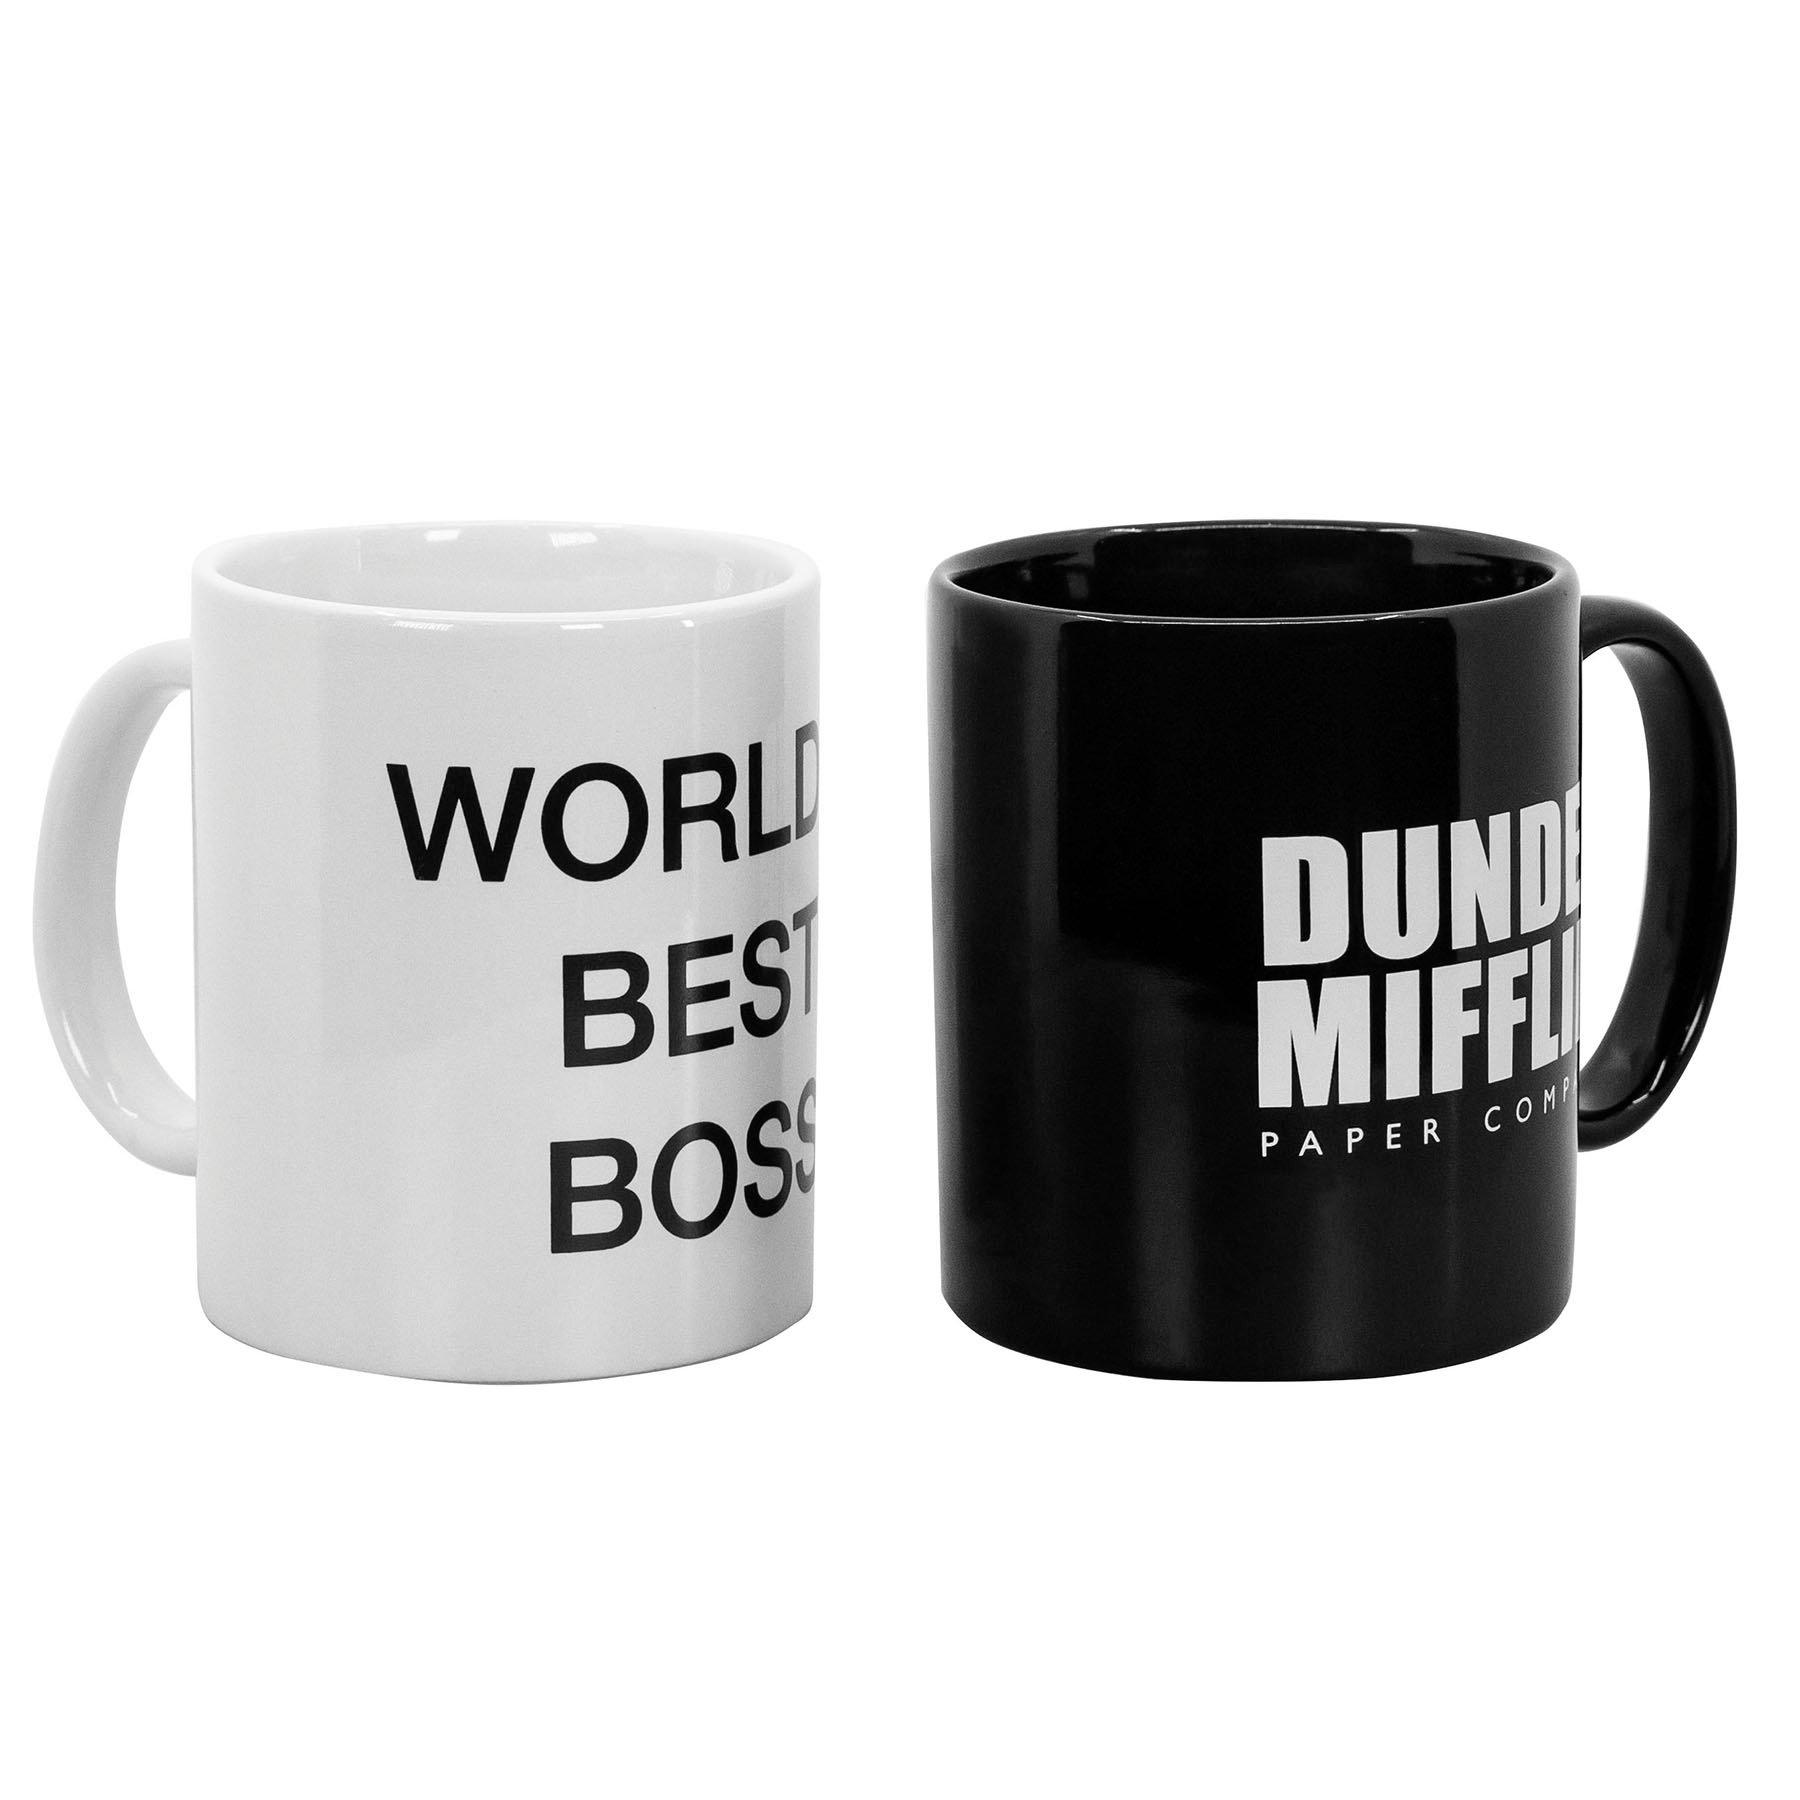 https://media.gamestop.com/i/gamestop/20005582_ALT02/The-Office-Single-Cup-Coffee-Maker-Gift-Set-with-2-Mugs?$pdp$